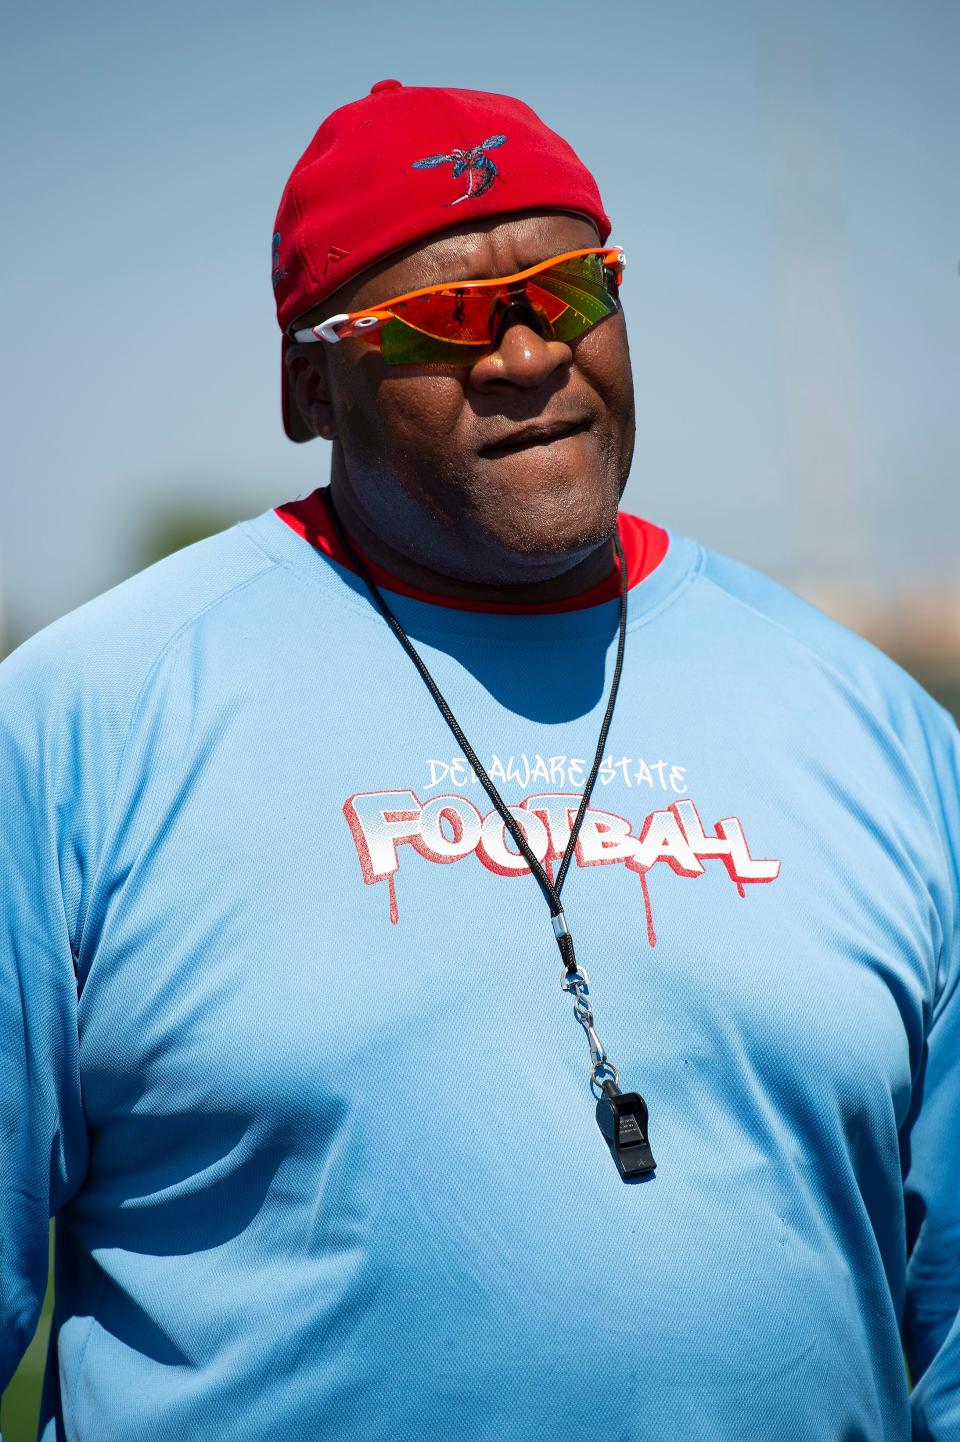 Rod Milstead’s dismissal came after five years as head football coach at Delaware State University.